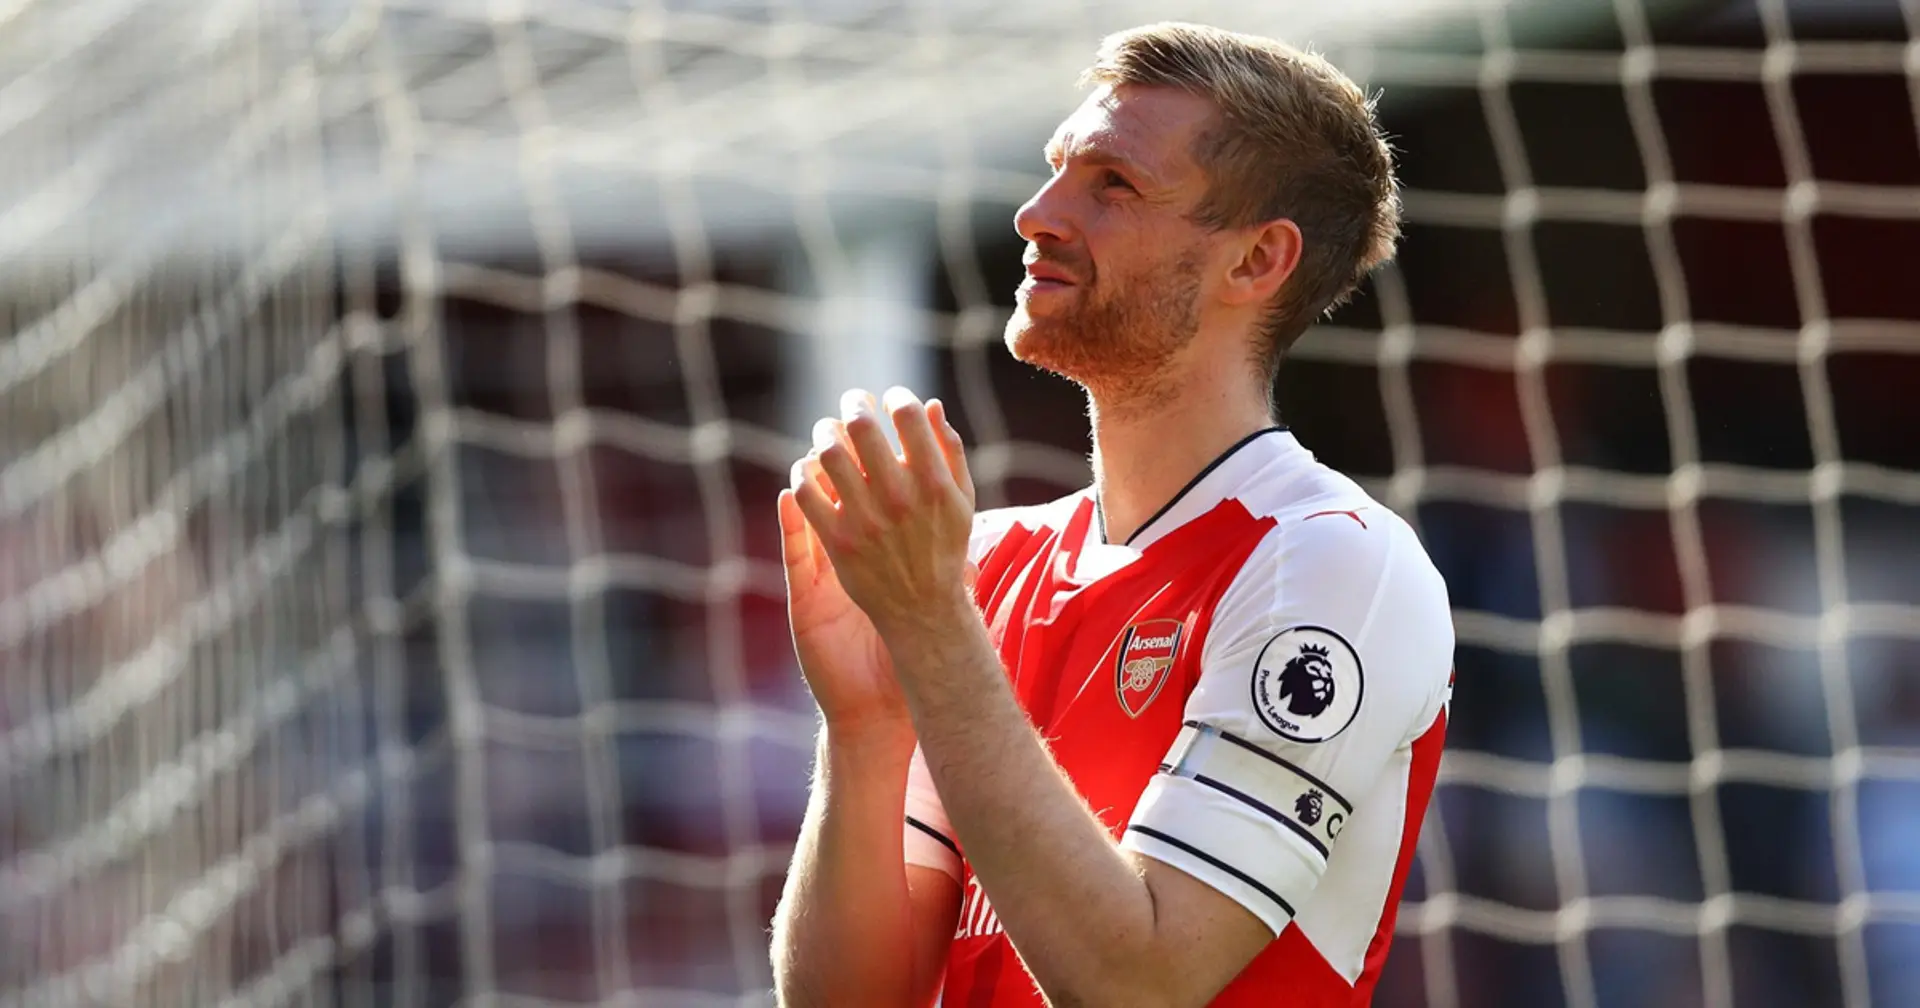 'It had to be messy, it had to be rushed. I didn't care': Mertesacker on his 2011 deadline-day move